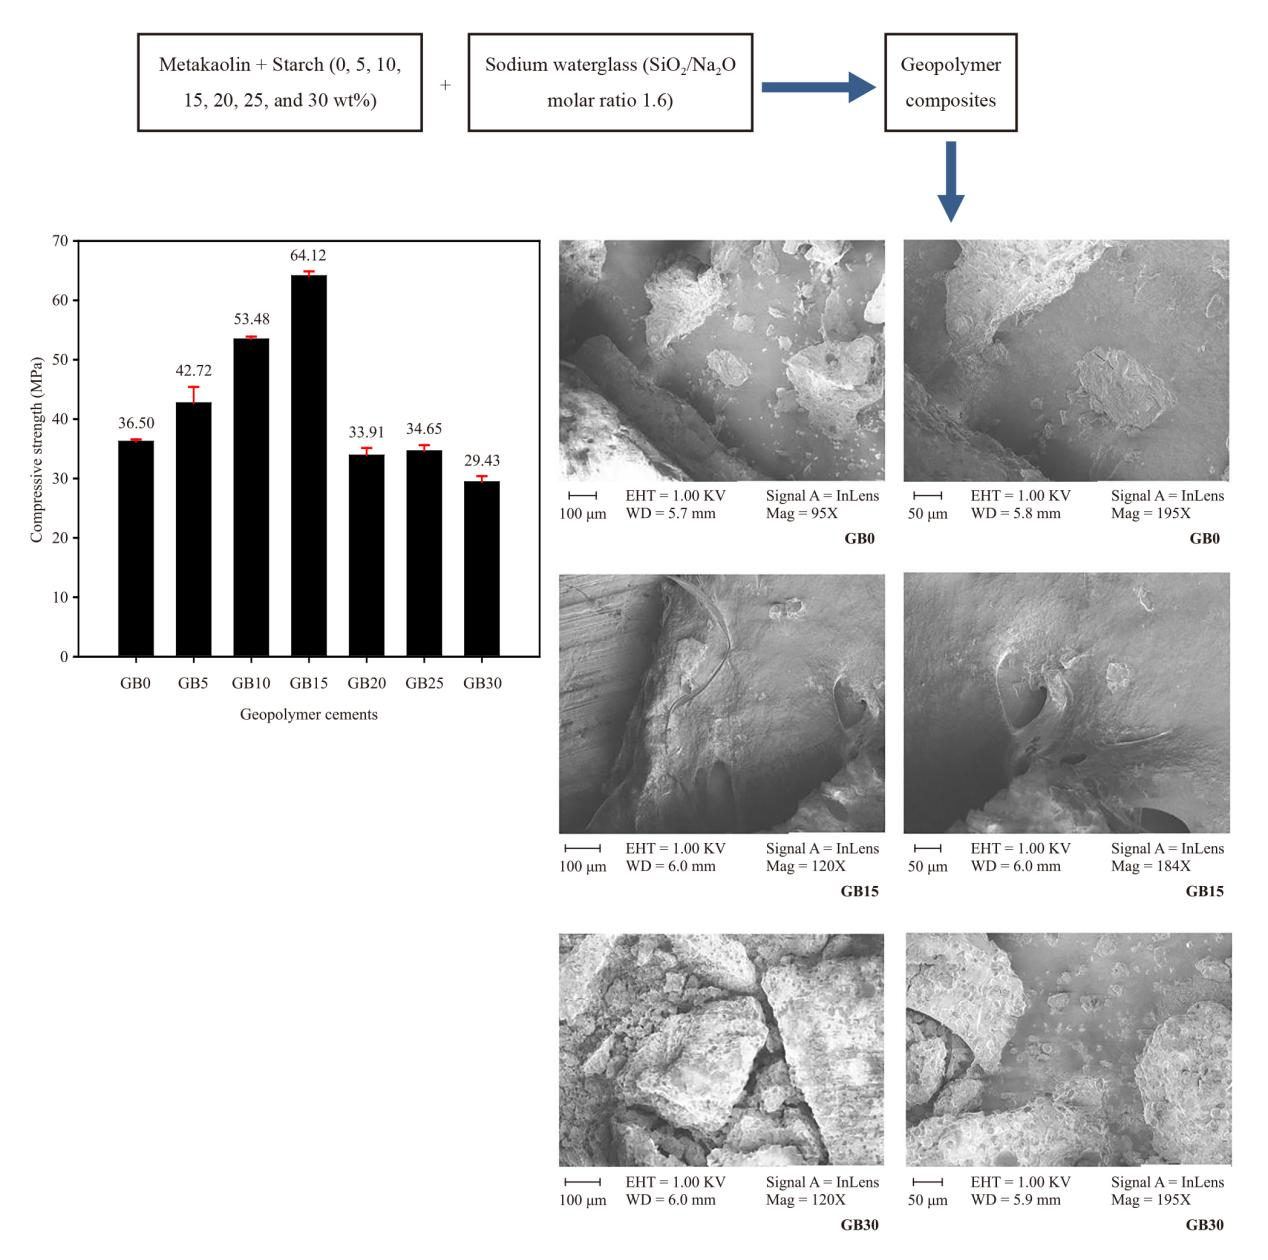 Influence of Starch Powder on Compressive Strength and Microstructural Properties of Geopolymer Composite Materials Based on Metakaolin